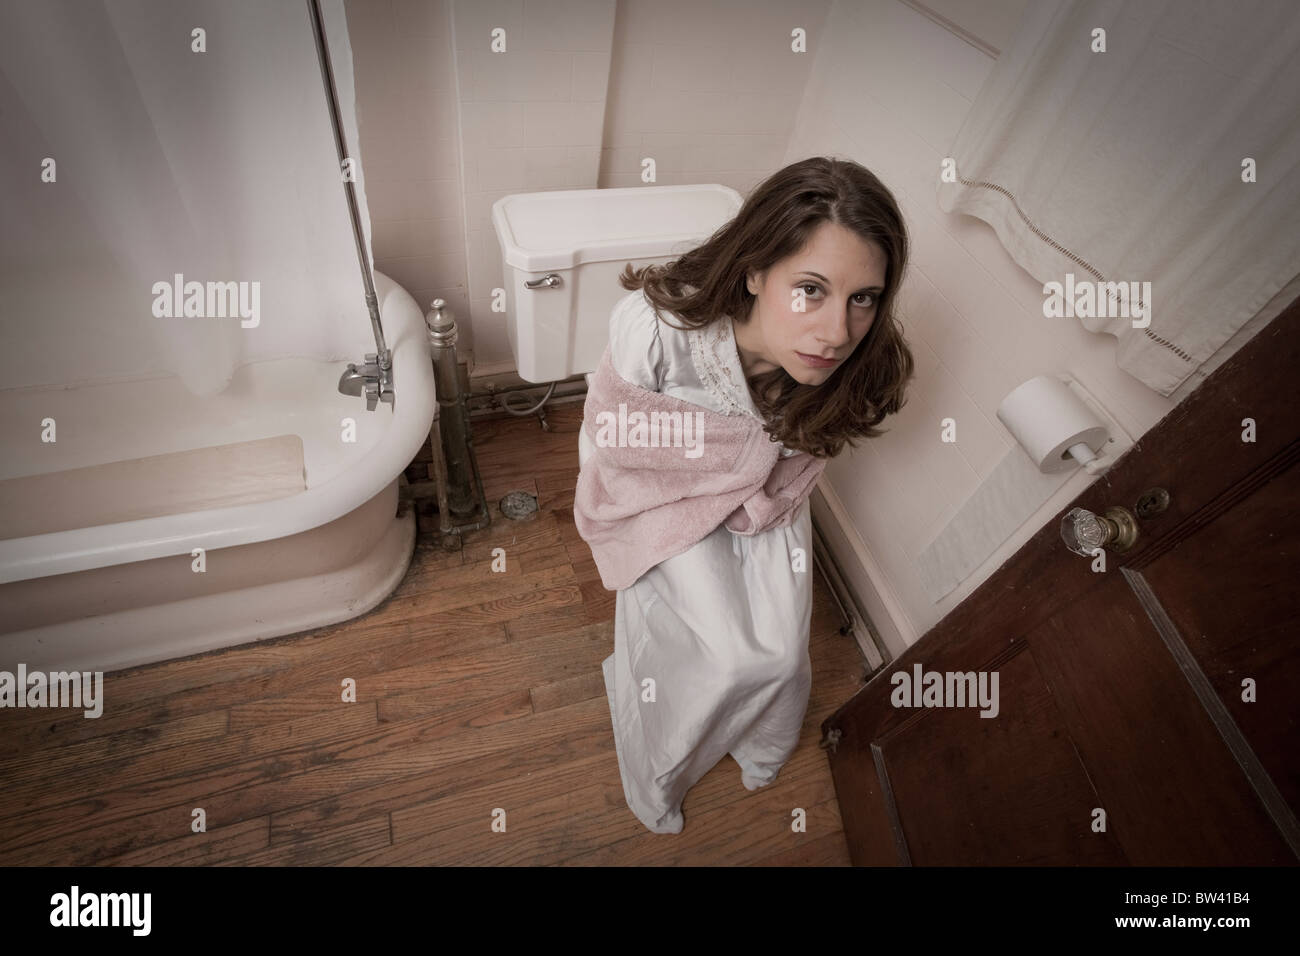 Young woman in a nightgown and a towel sitting on the edge of her toilet Stock Photo